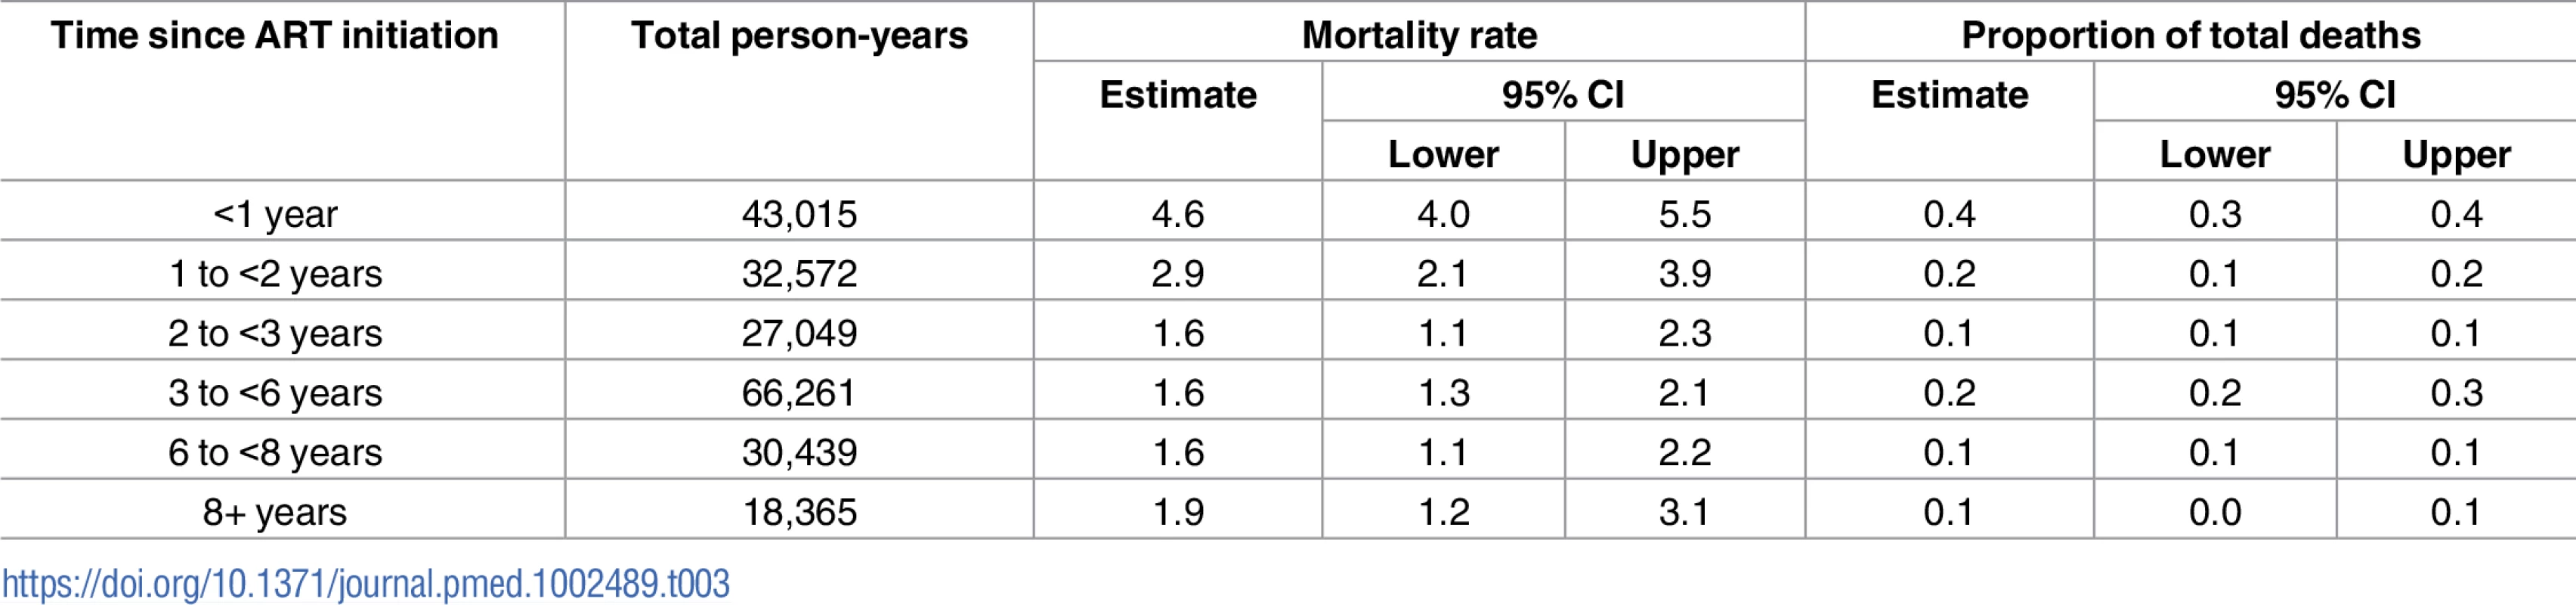 Duration on antiretroviral therapy (ART) and contribution to overall mortality among all ART users.